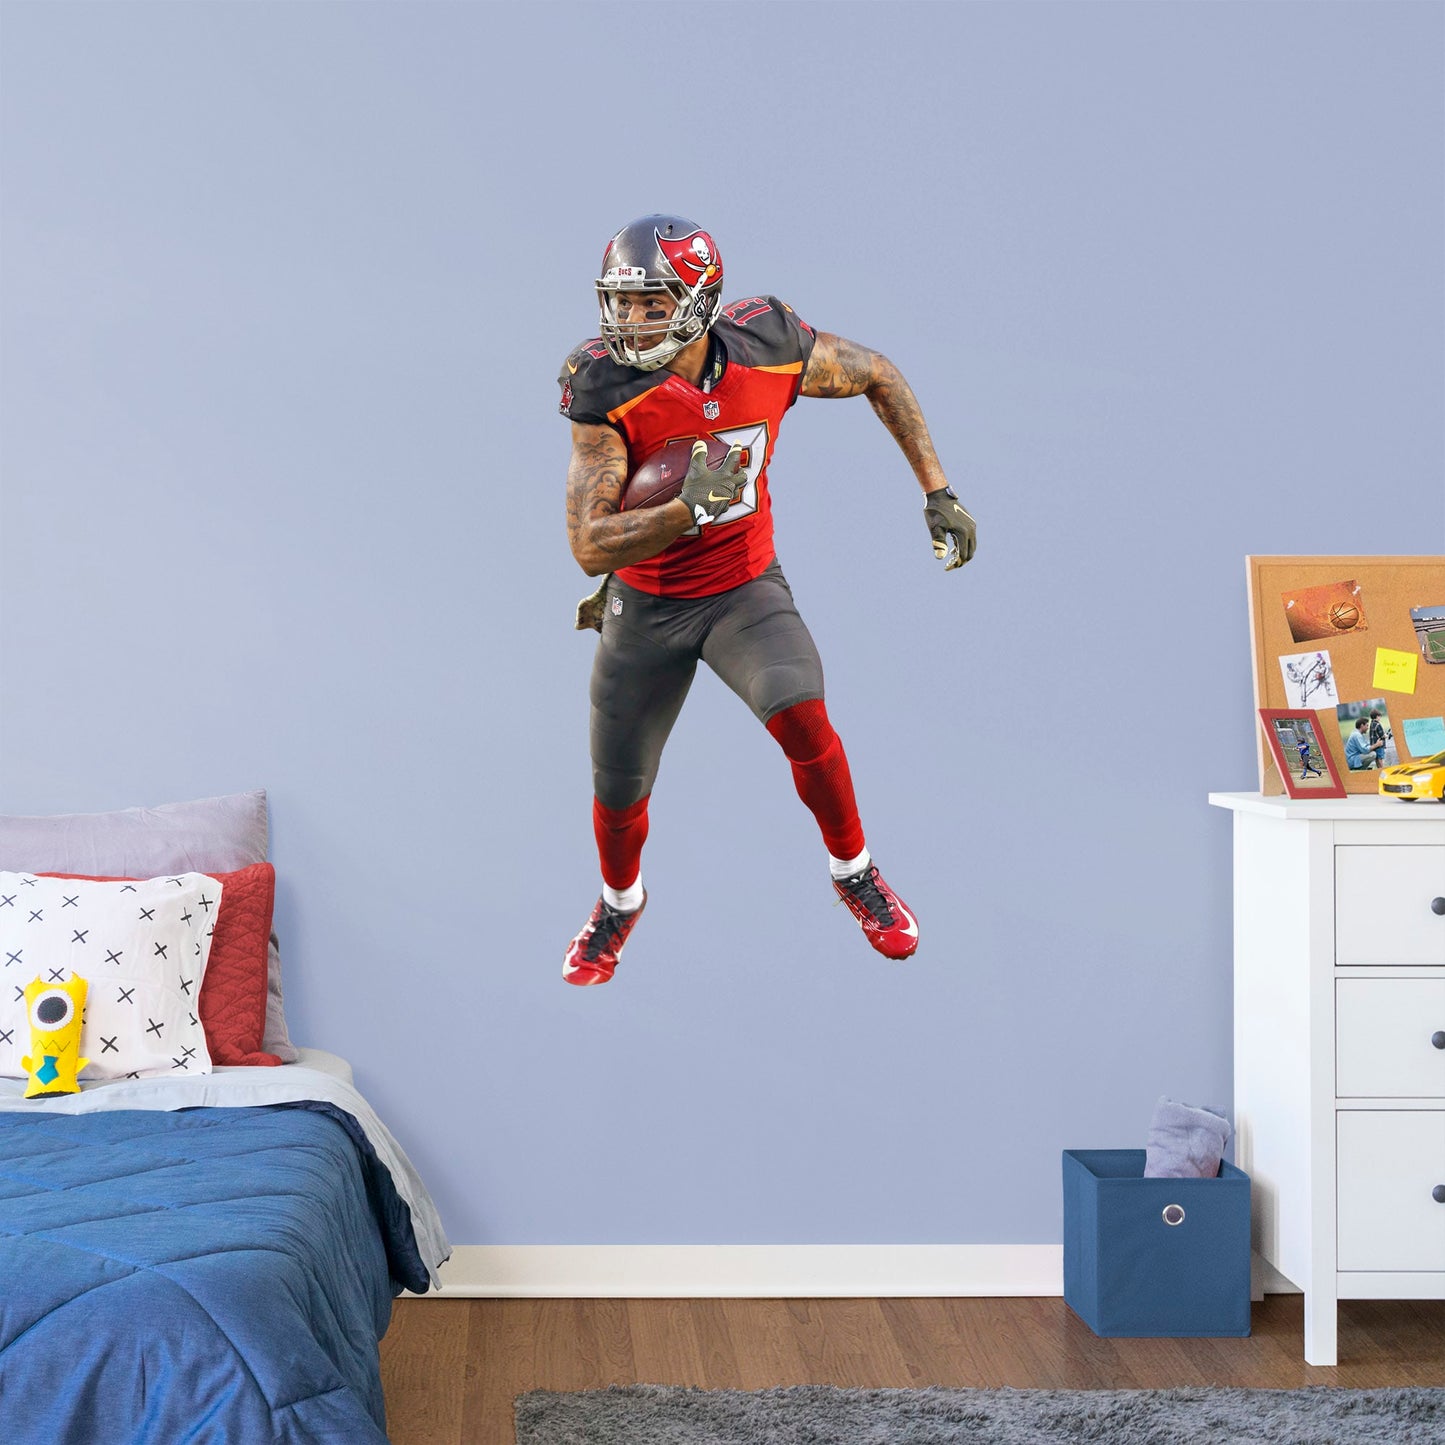 Life-Size Athlete + 2 Decals (42"W x 78"H) Bring the action of the NFL into your home with a wall decal of Mike Evans! High quality, durable, and tear resistant, you'll be able to stick and move it as many times as you want to create the ultimate football experience in any room!